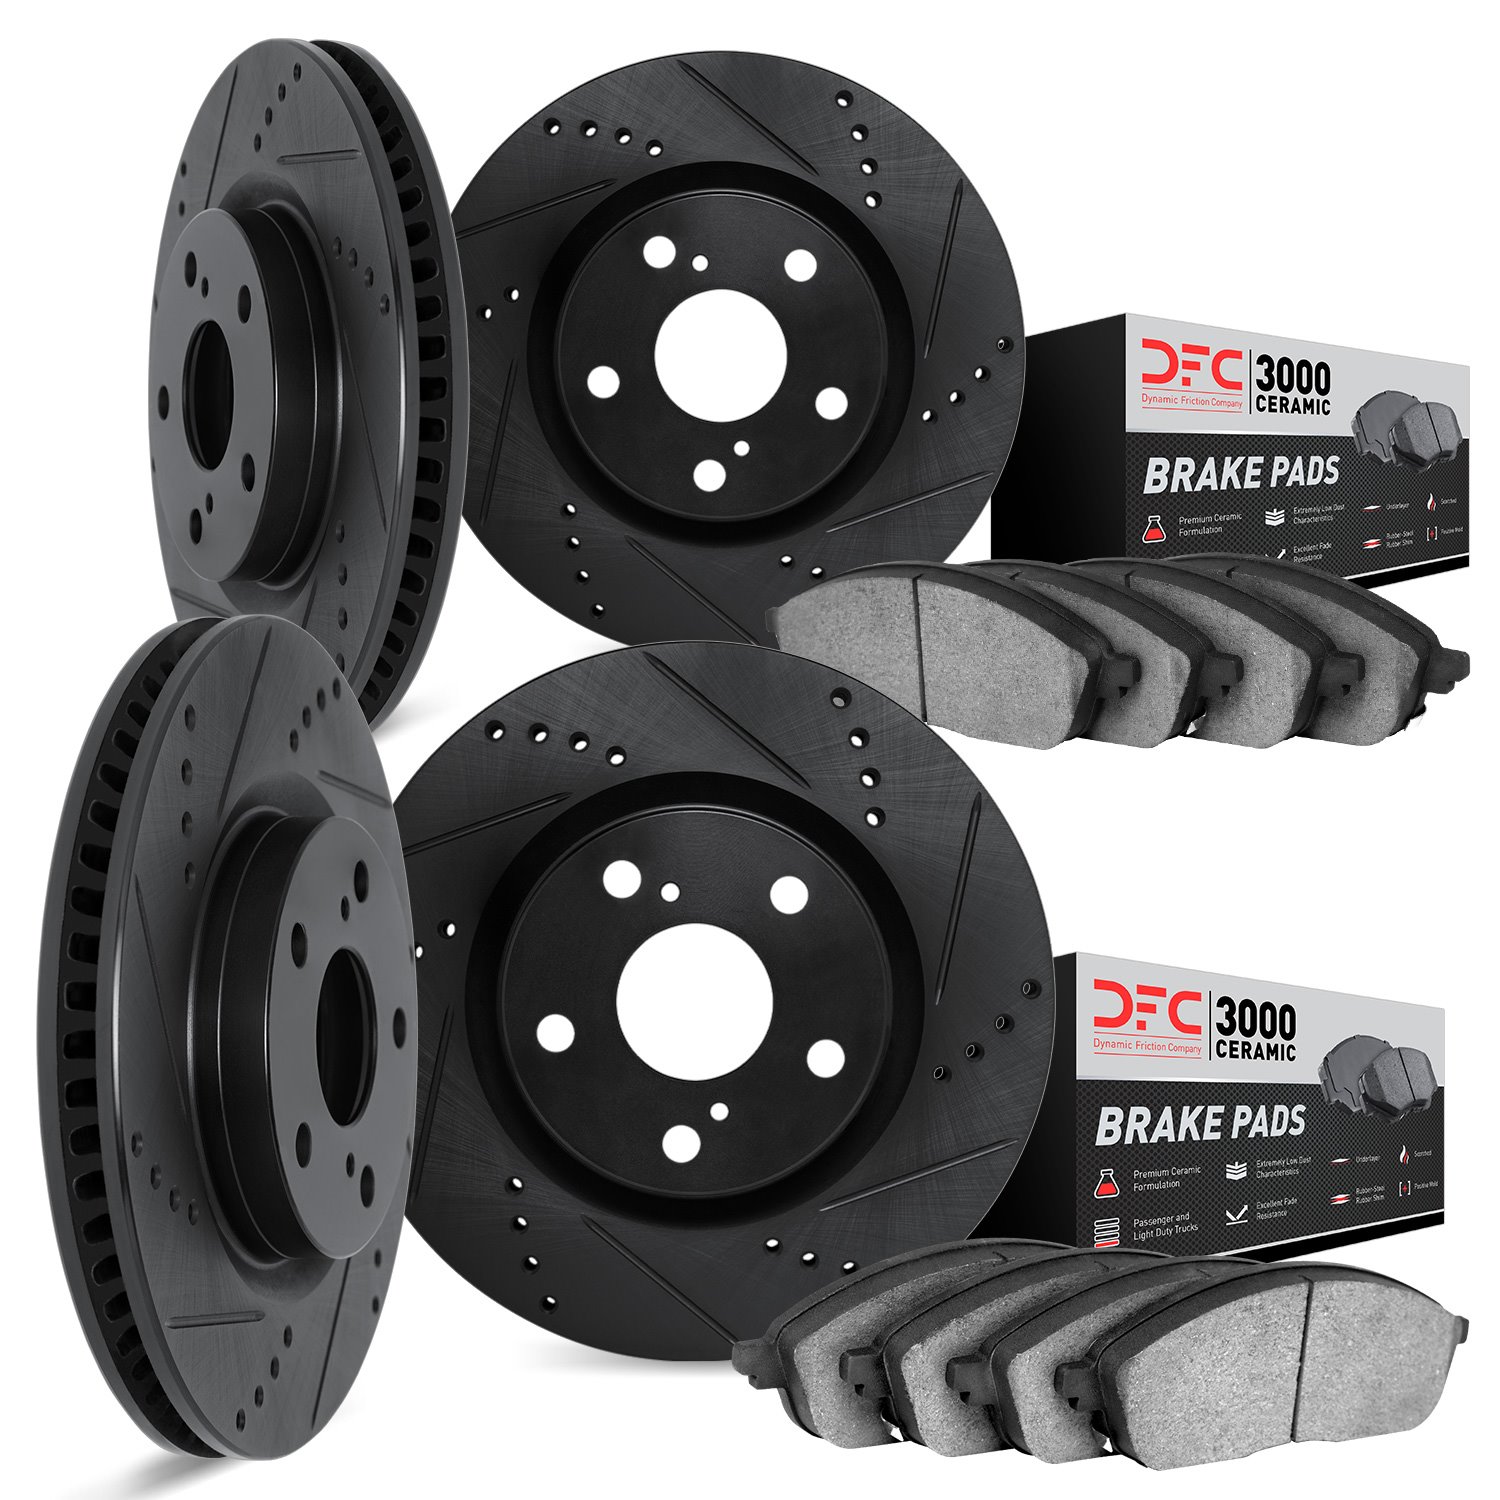 8304-02011 Drilled/Slotted Brake Rotors with 3000-Series Ceramic Brake Pads Kit [Black], 1989-1991 Porsche, Position: Front and